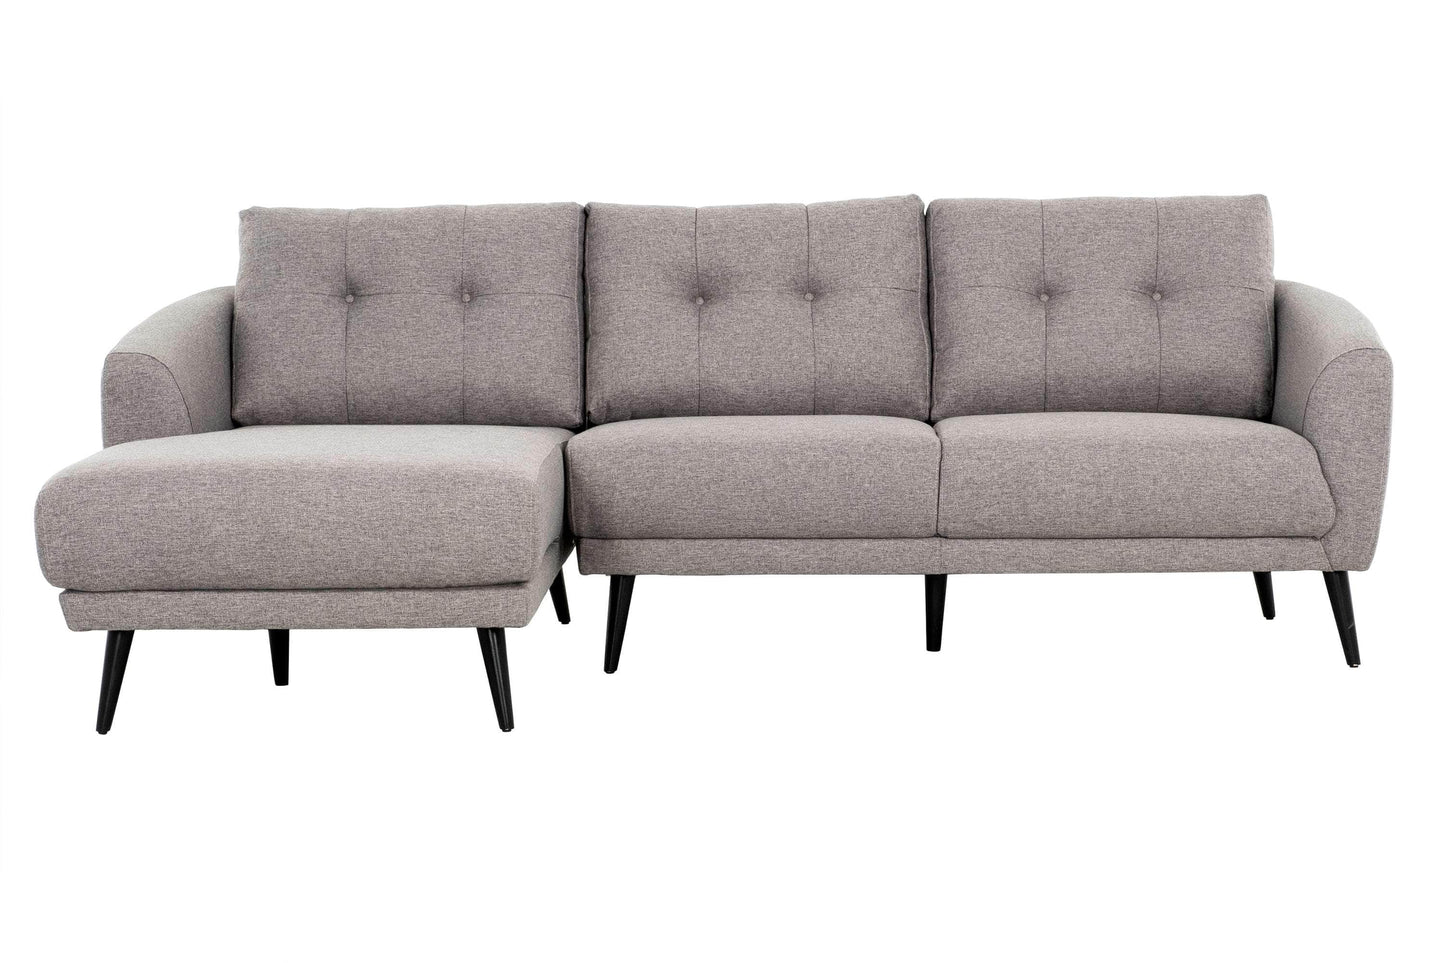 True Contemporary Sectional Left Facing Chaise Elizabeth Tufted Sectional Sofa in Nia Grey